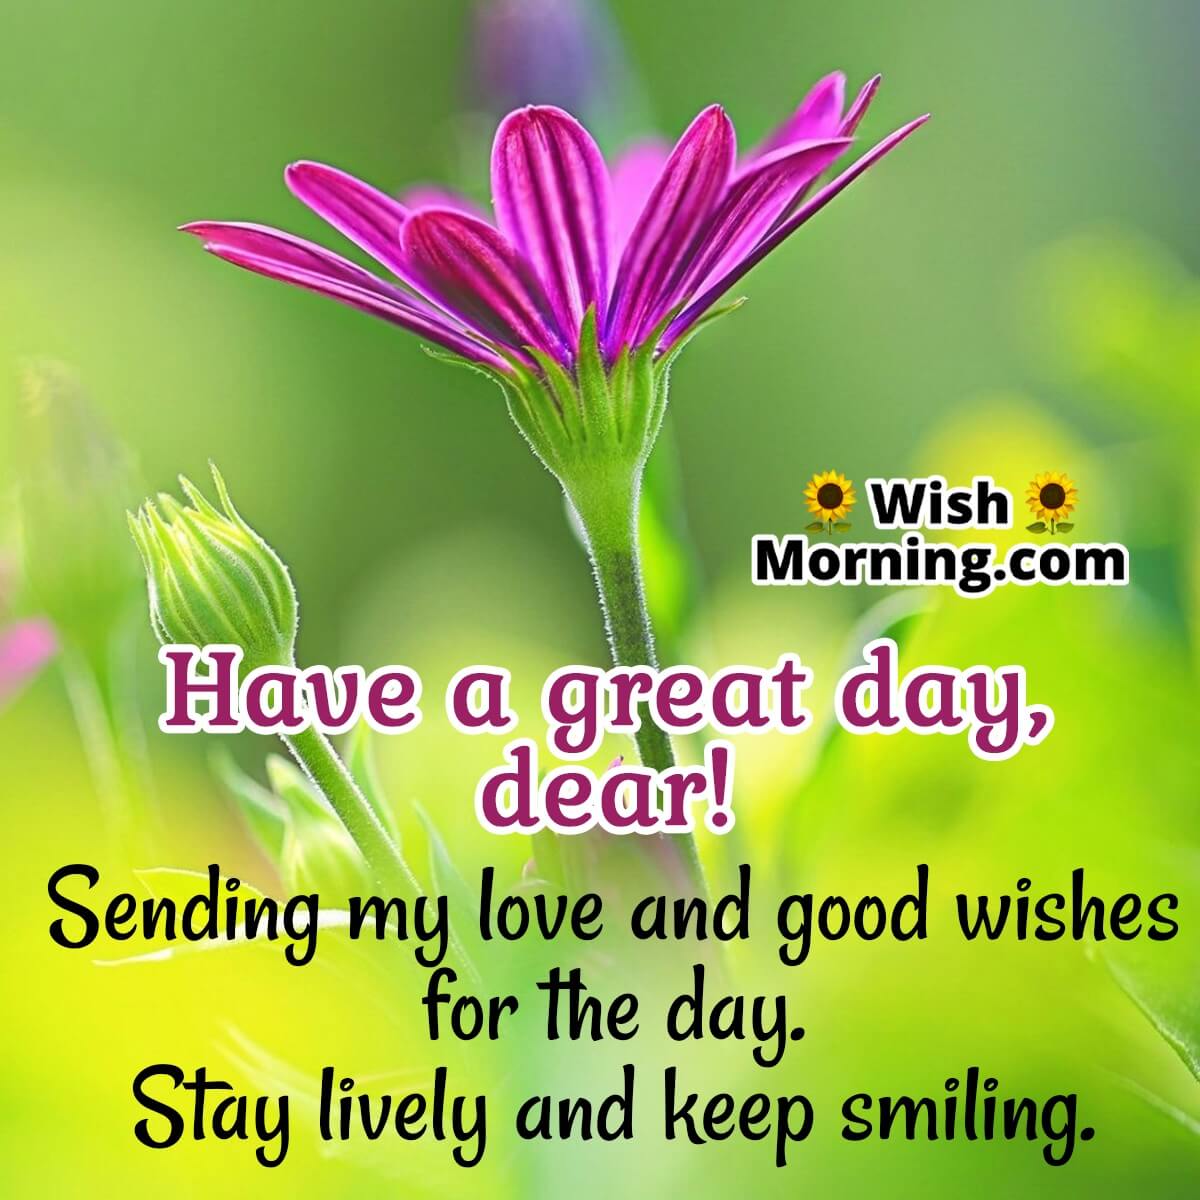 Have A Great Day, Dear